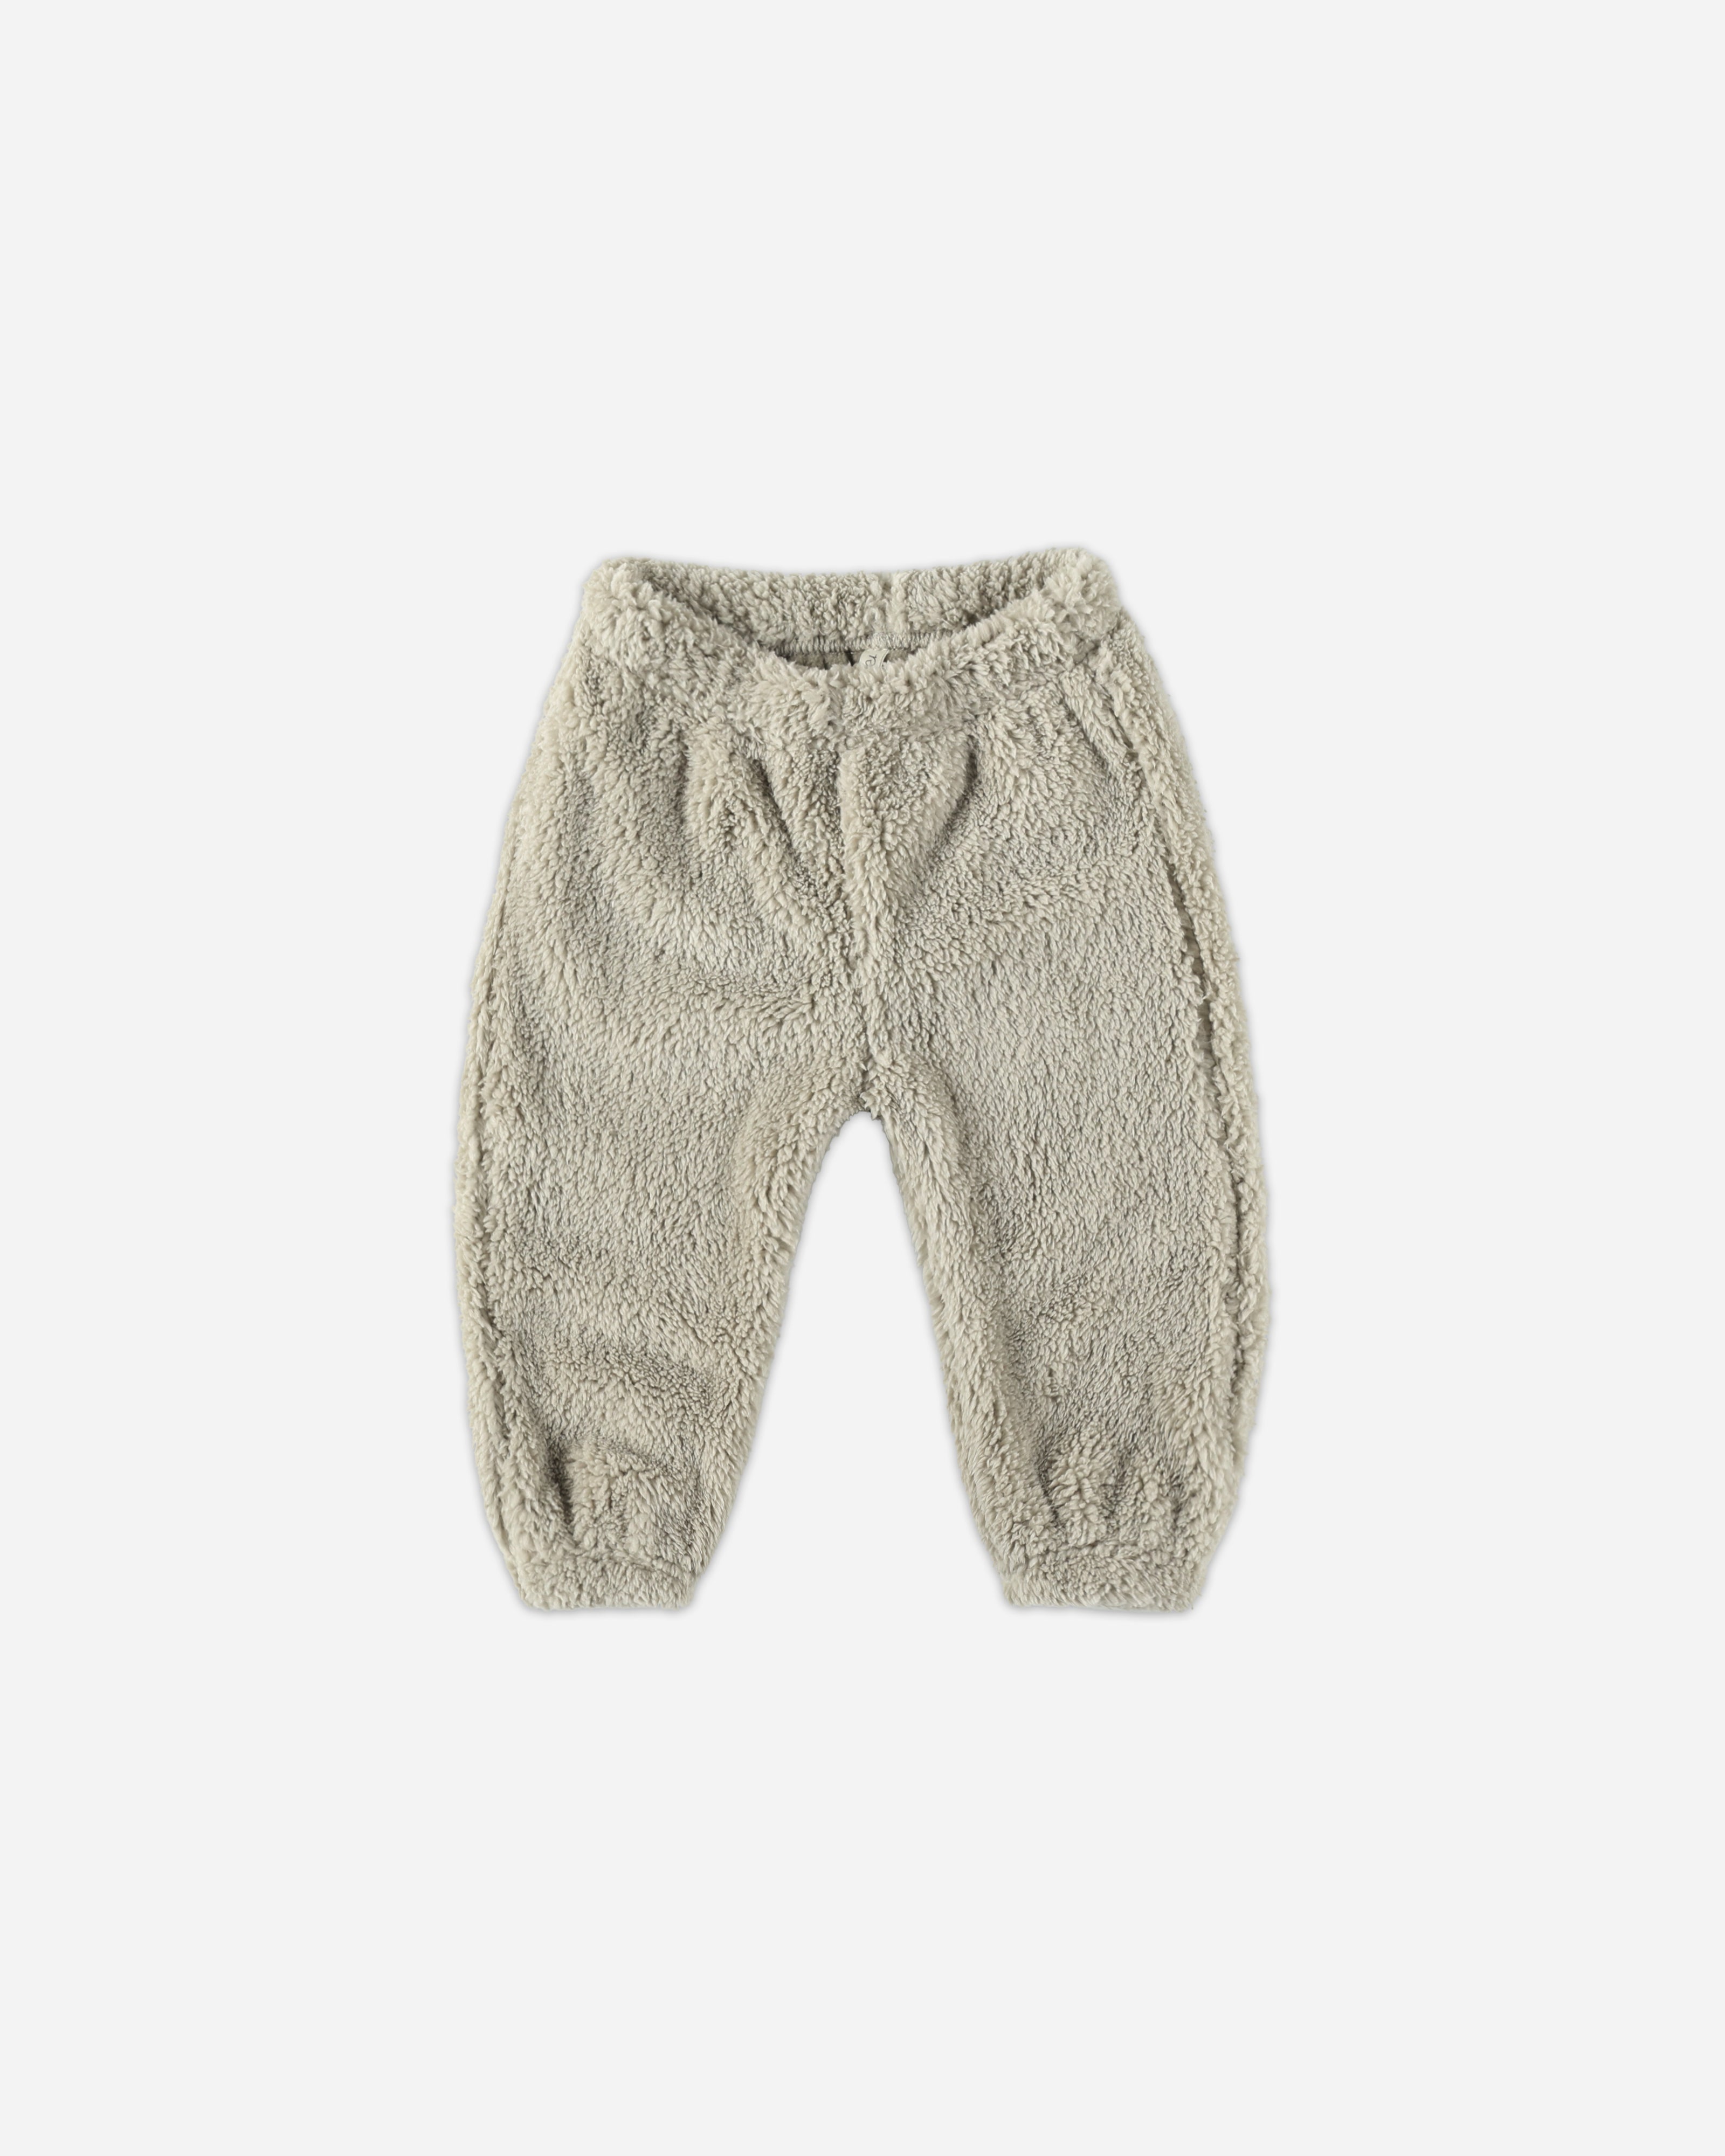 Relaxed Sweatpants || Pewter